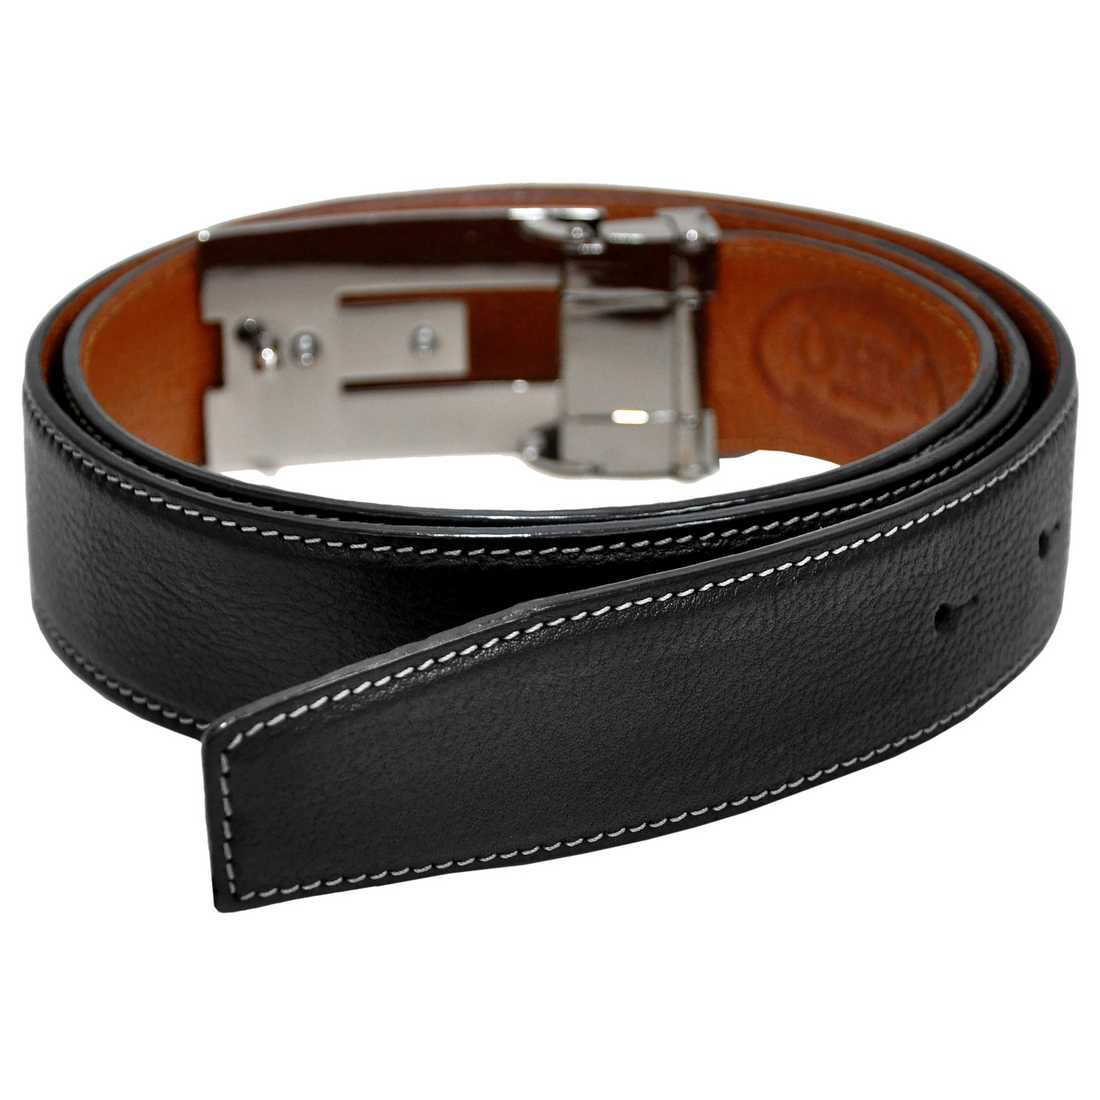 OHM New York Grained Soft Leather Perimeter Stitched Handmade Reversible Belts Tan/Black